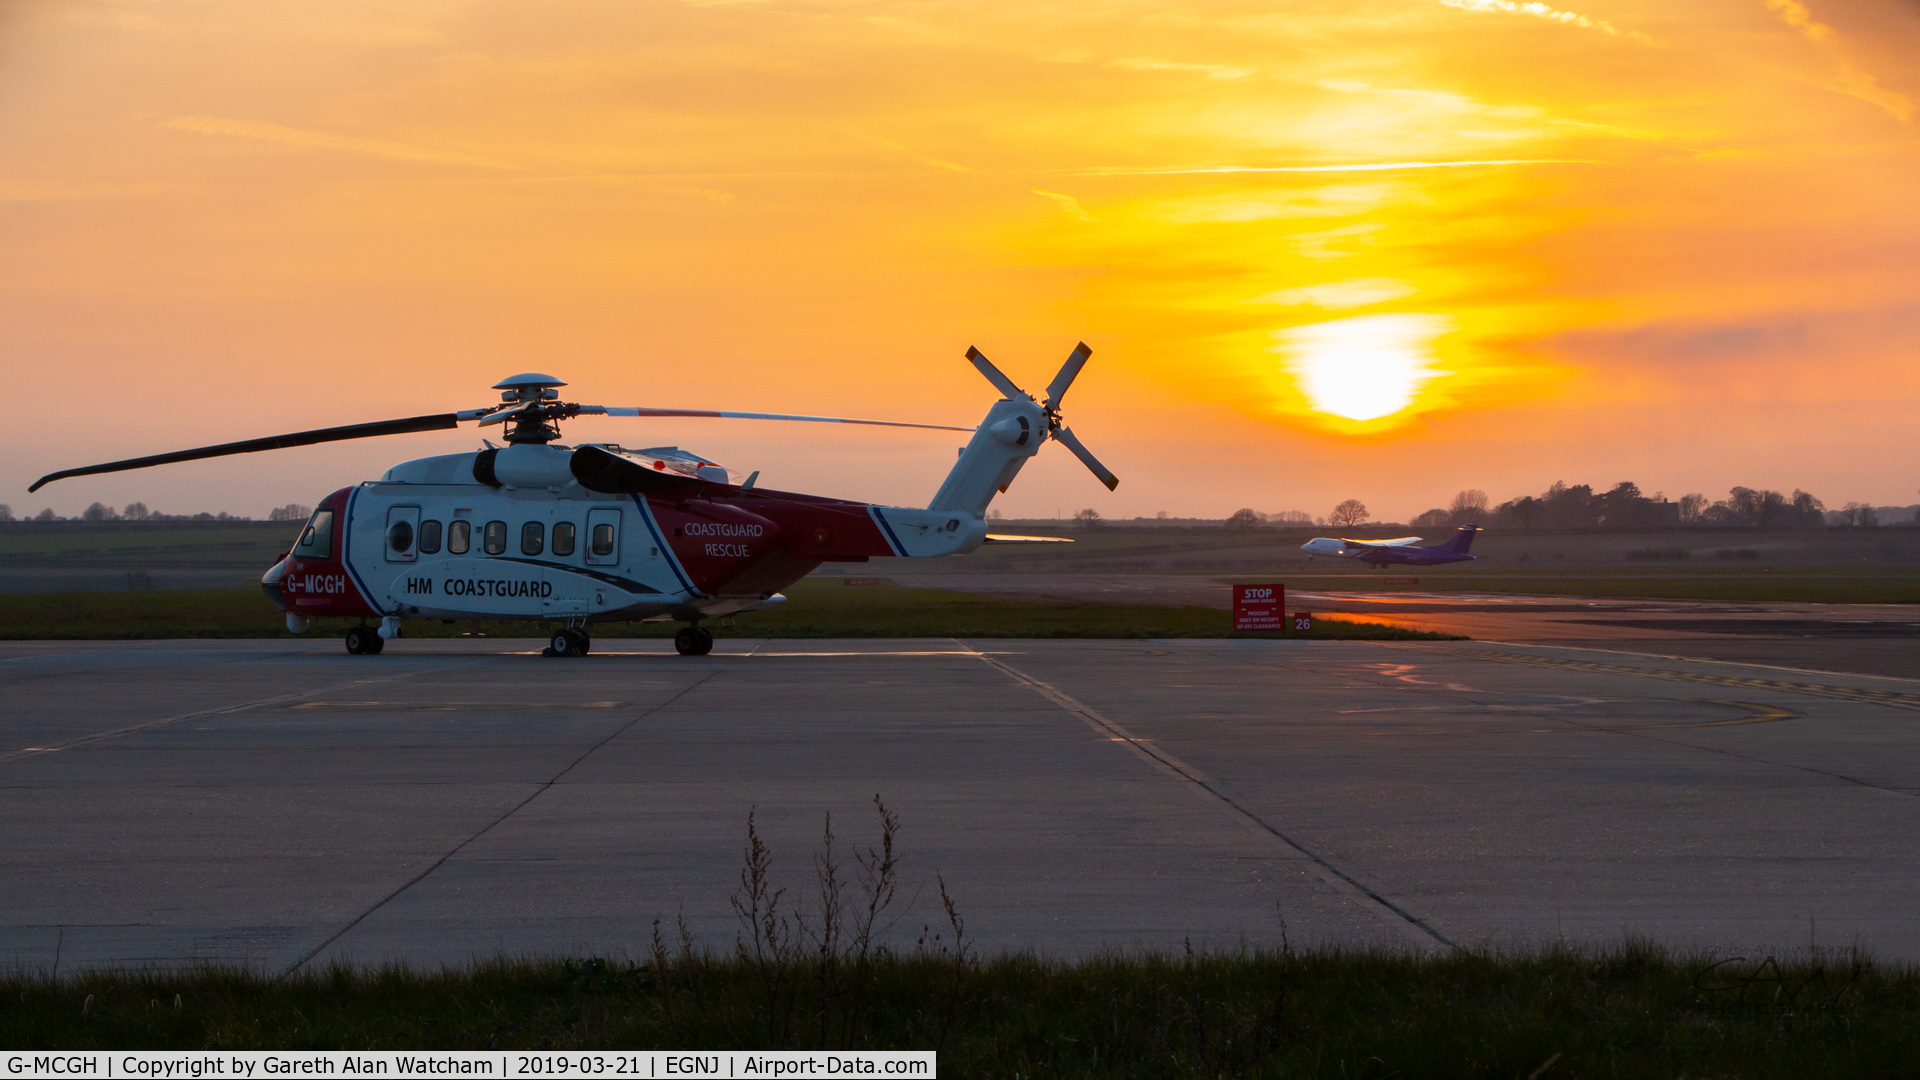 G-MCGH, 2014 Sikorsky S-92A C/N 920234, G-MCGH on the pan with ATR 72-600 G-IACY taking to the skies in background